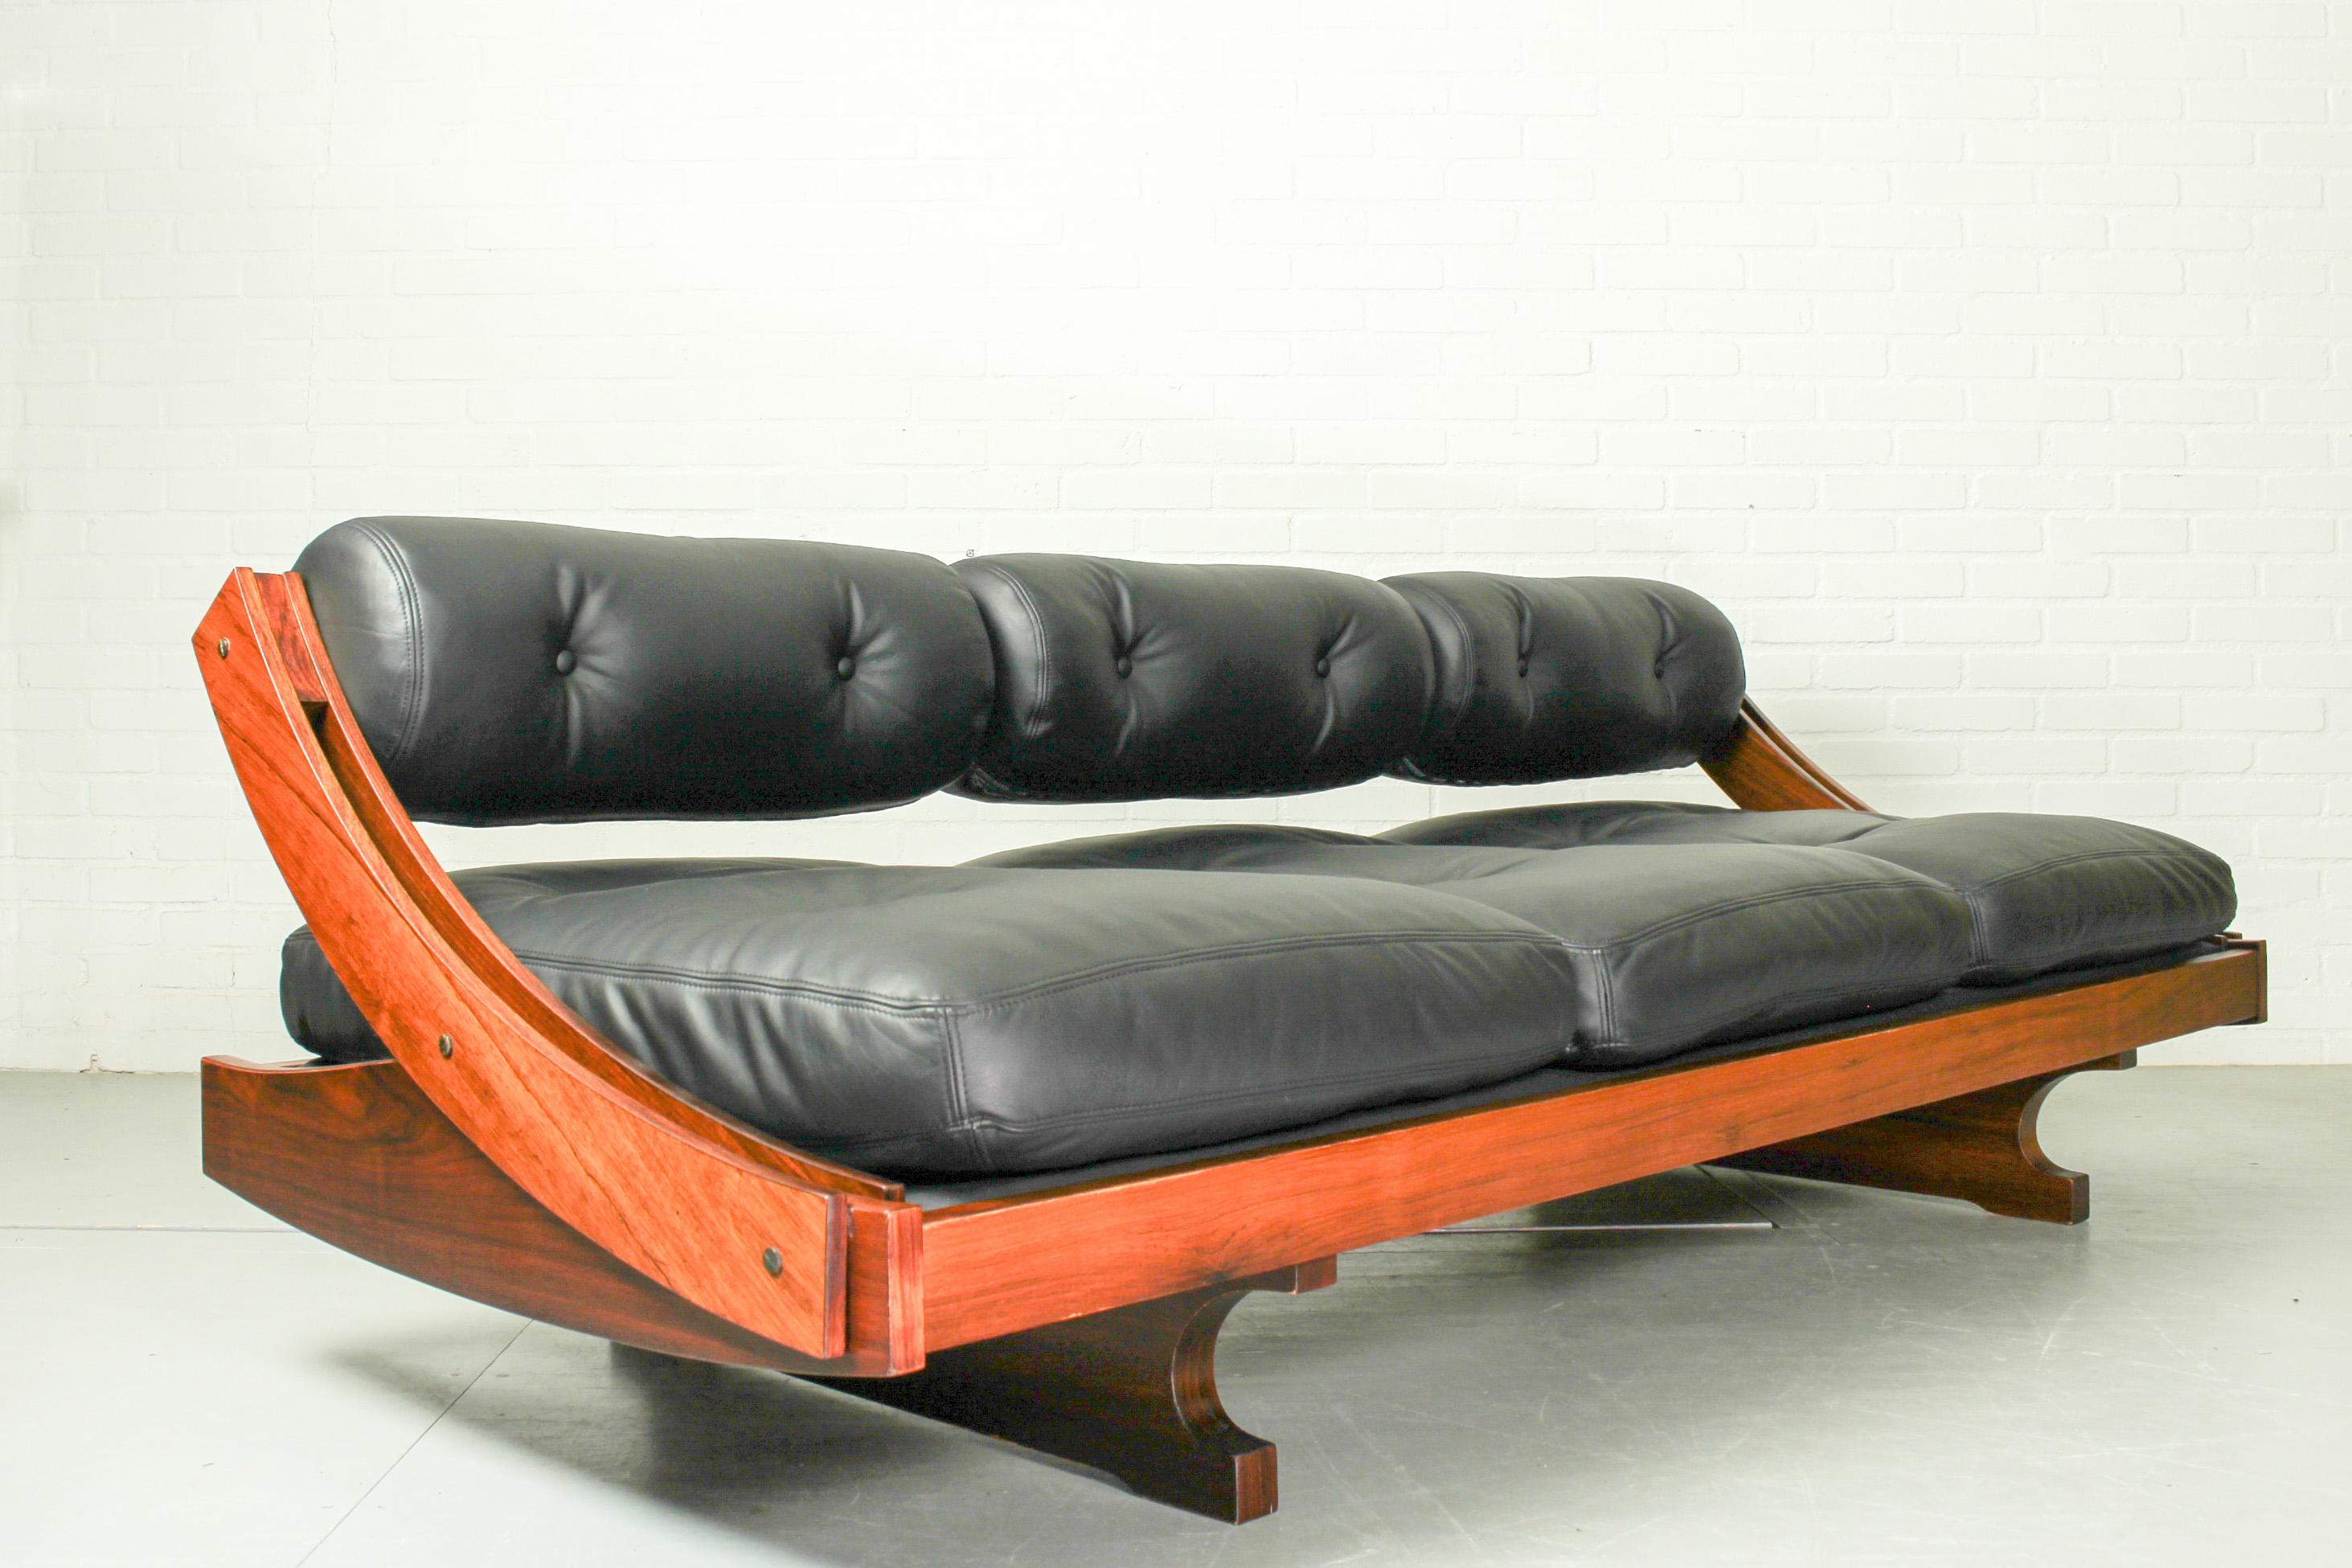 Mid-Century Modern Rosewood Daybed Sofa GS 195 by Gianni Songia for Sormani in New Black Leather